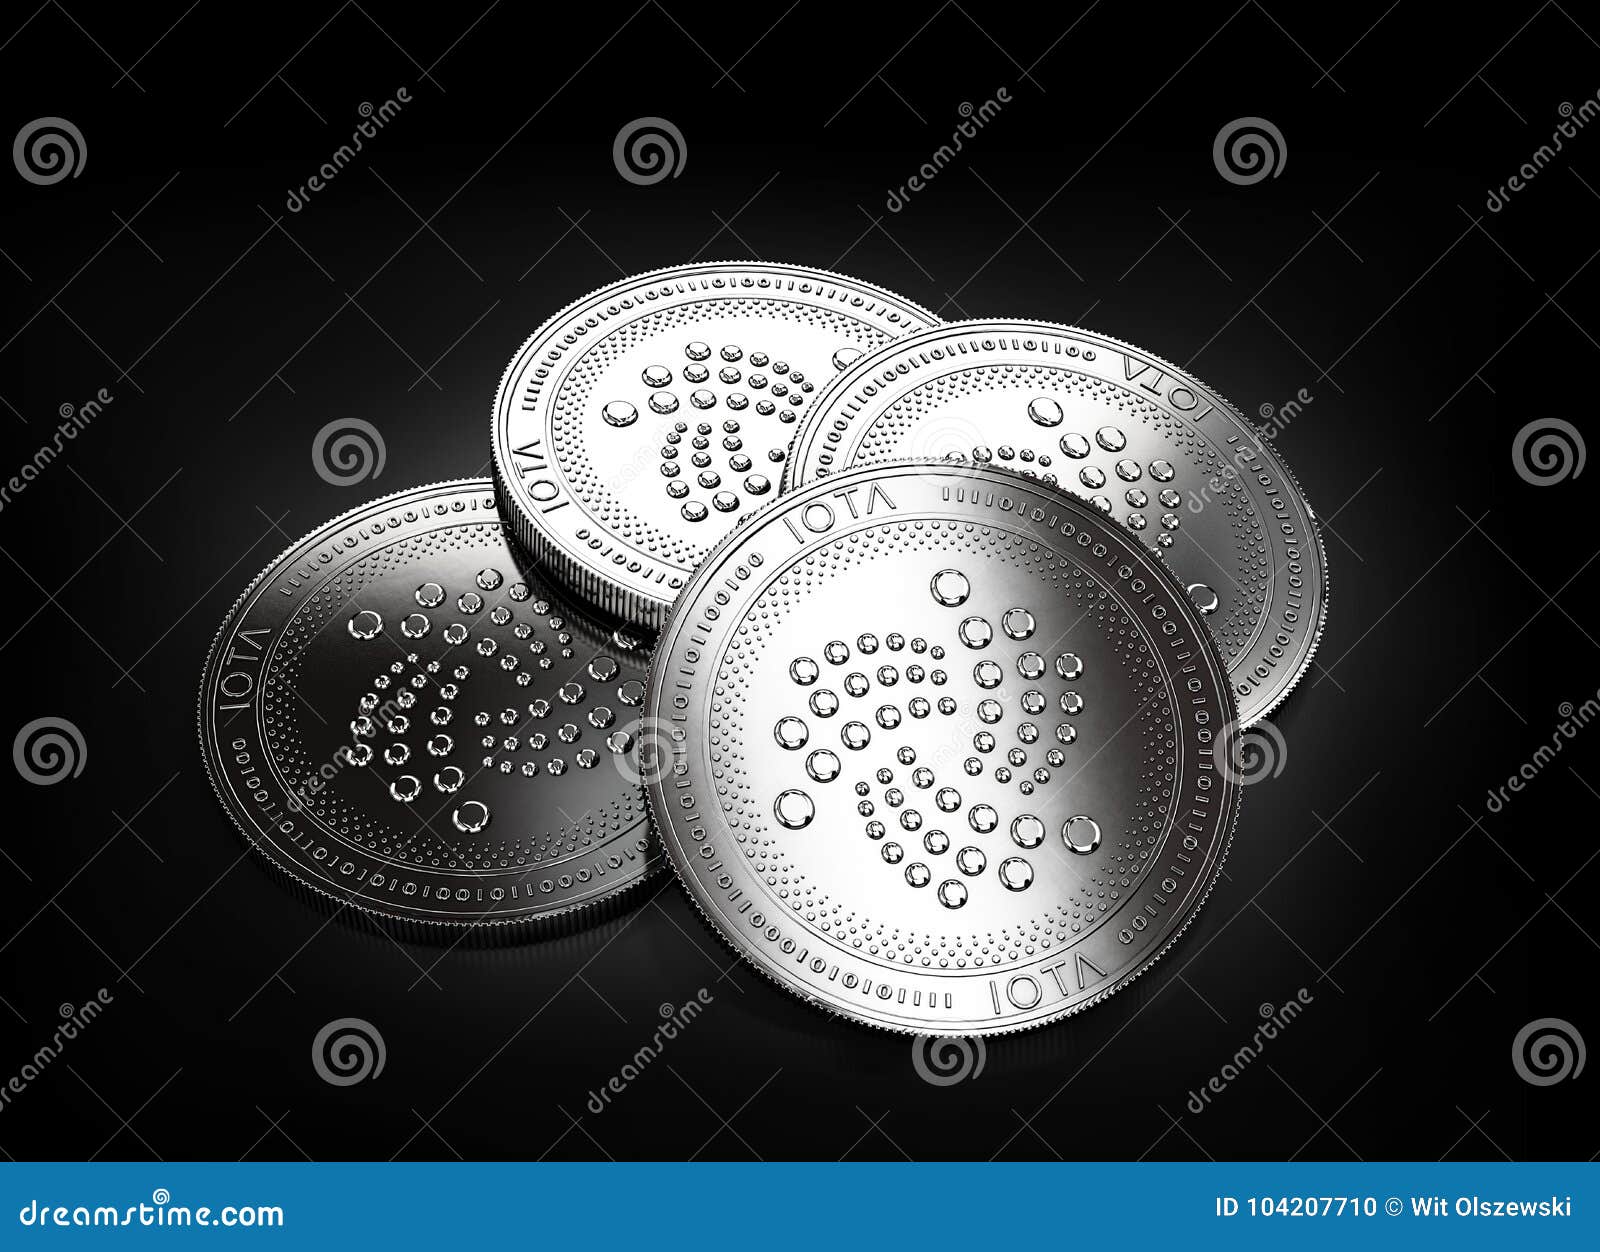 stack of four silver iota coins laying on the black background